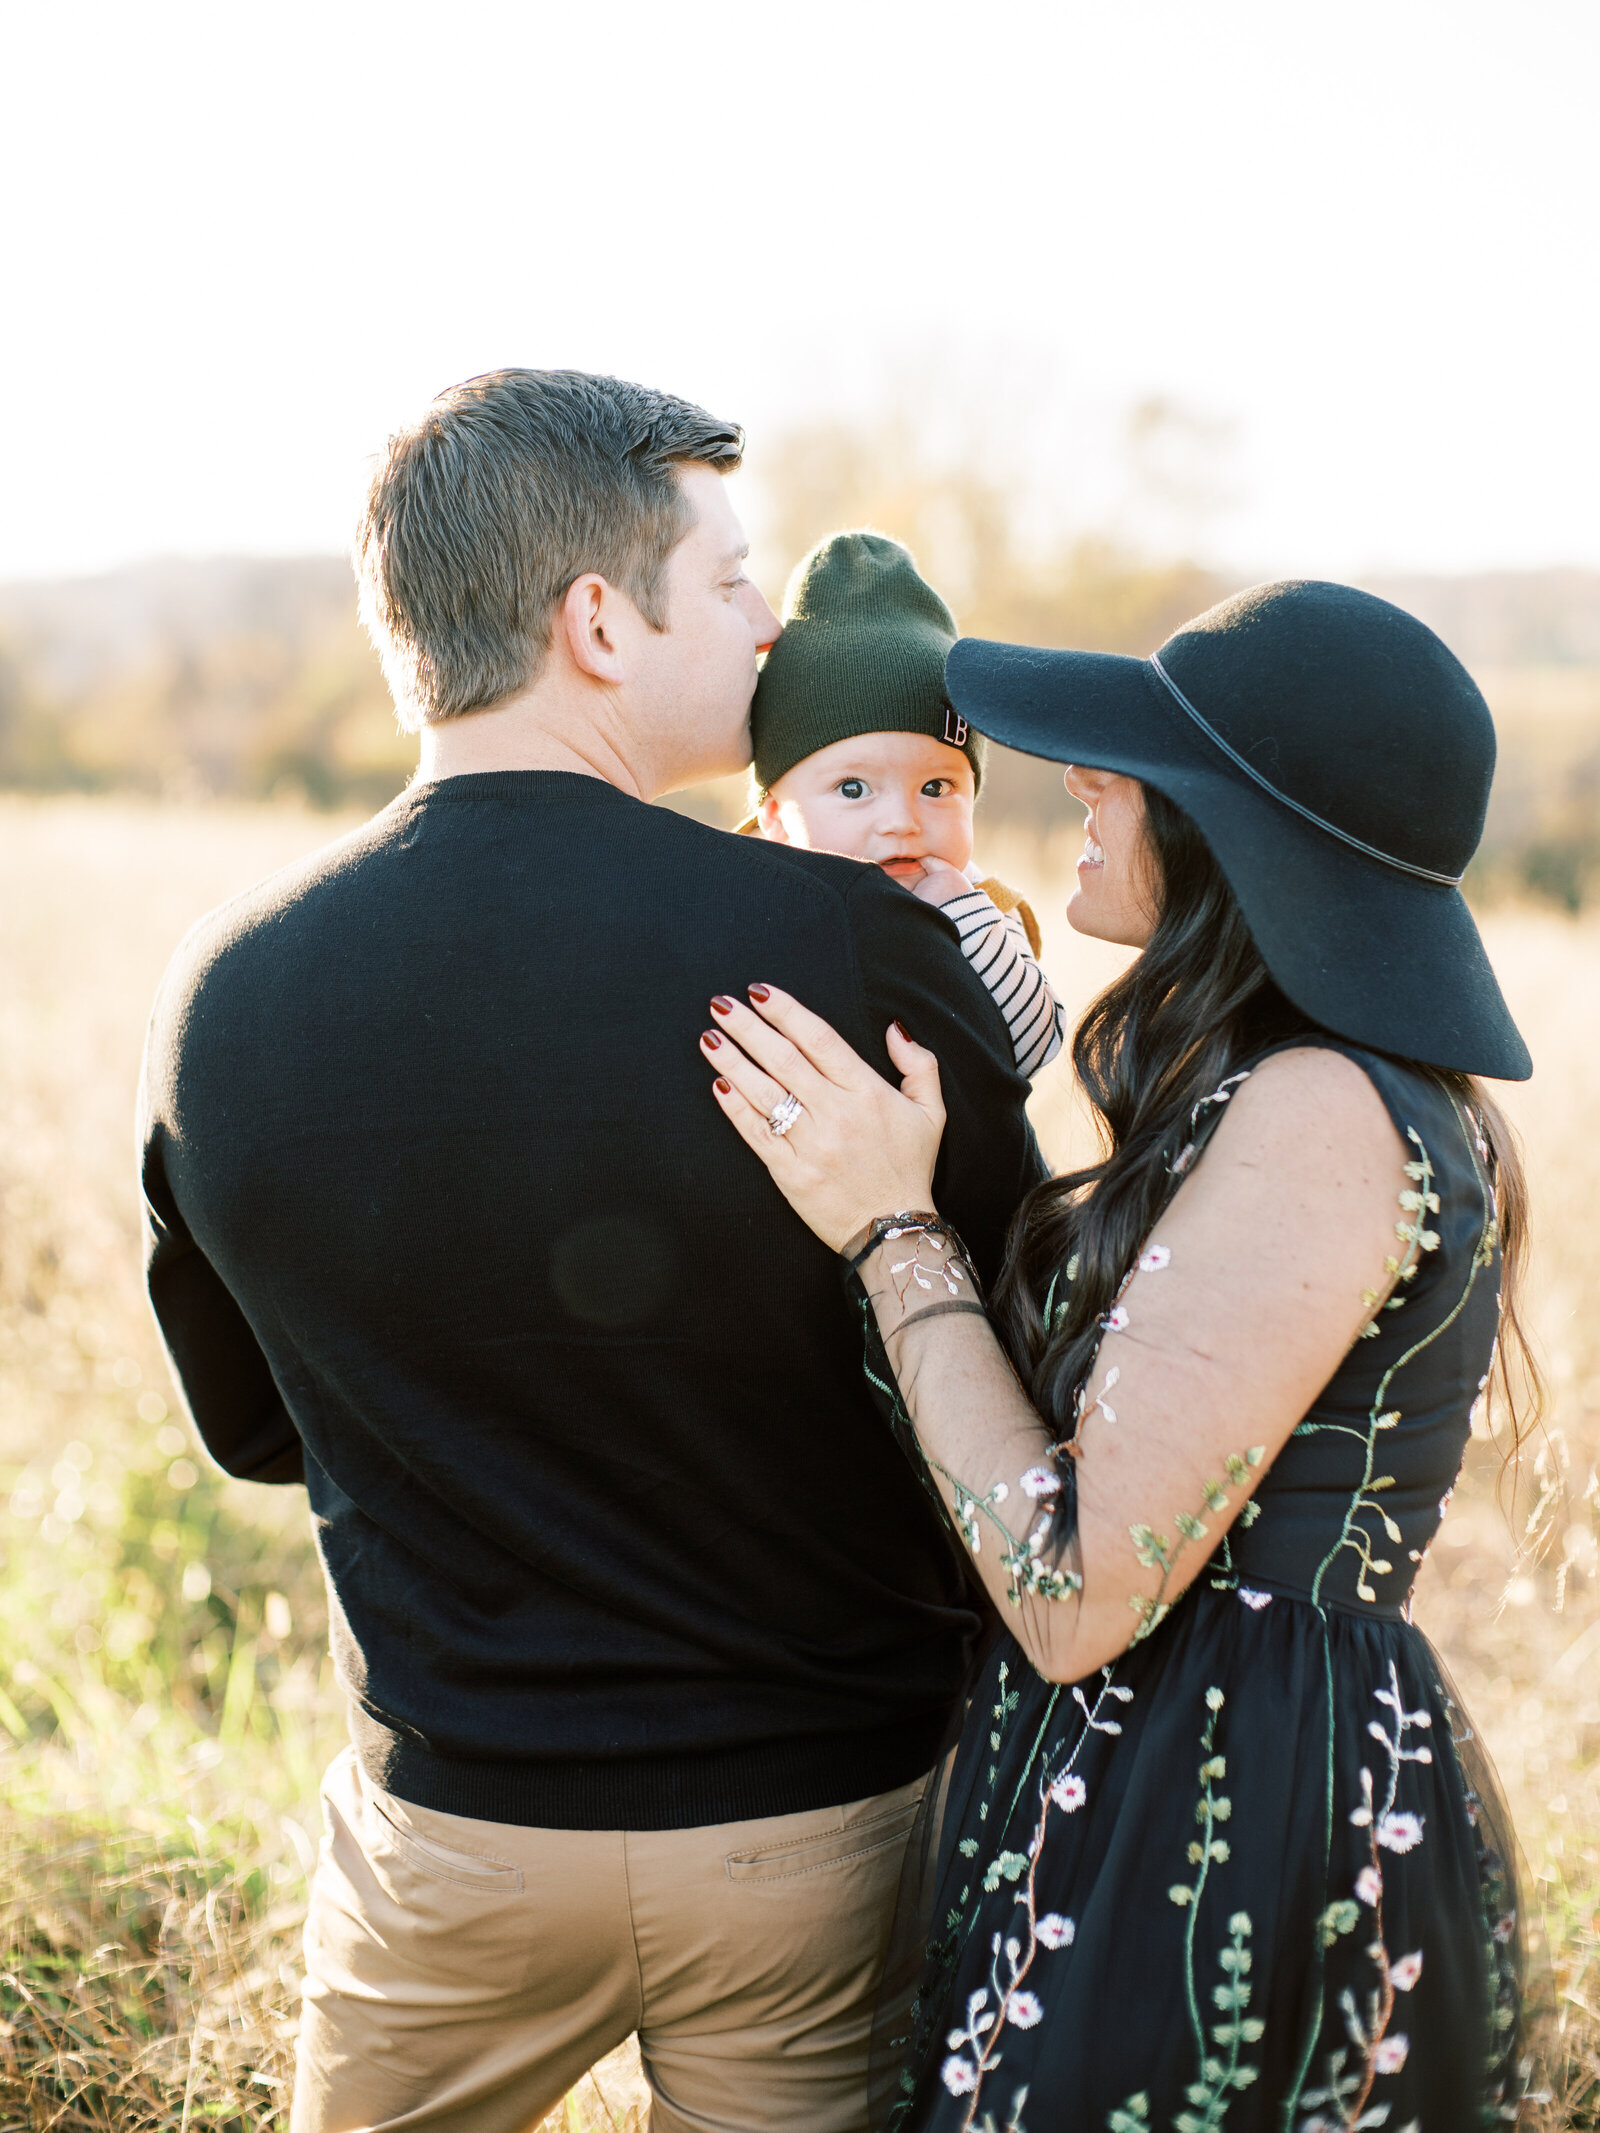 Delaware Family Photographer, Stacy Hart Photography2154